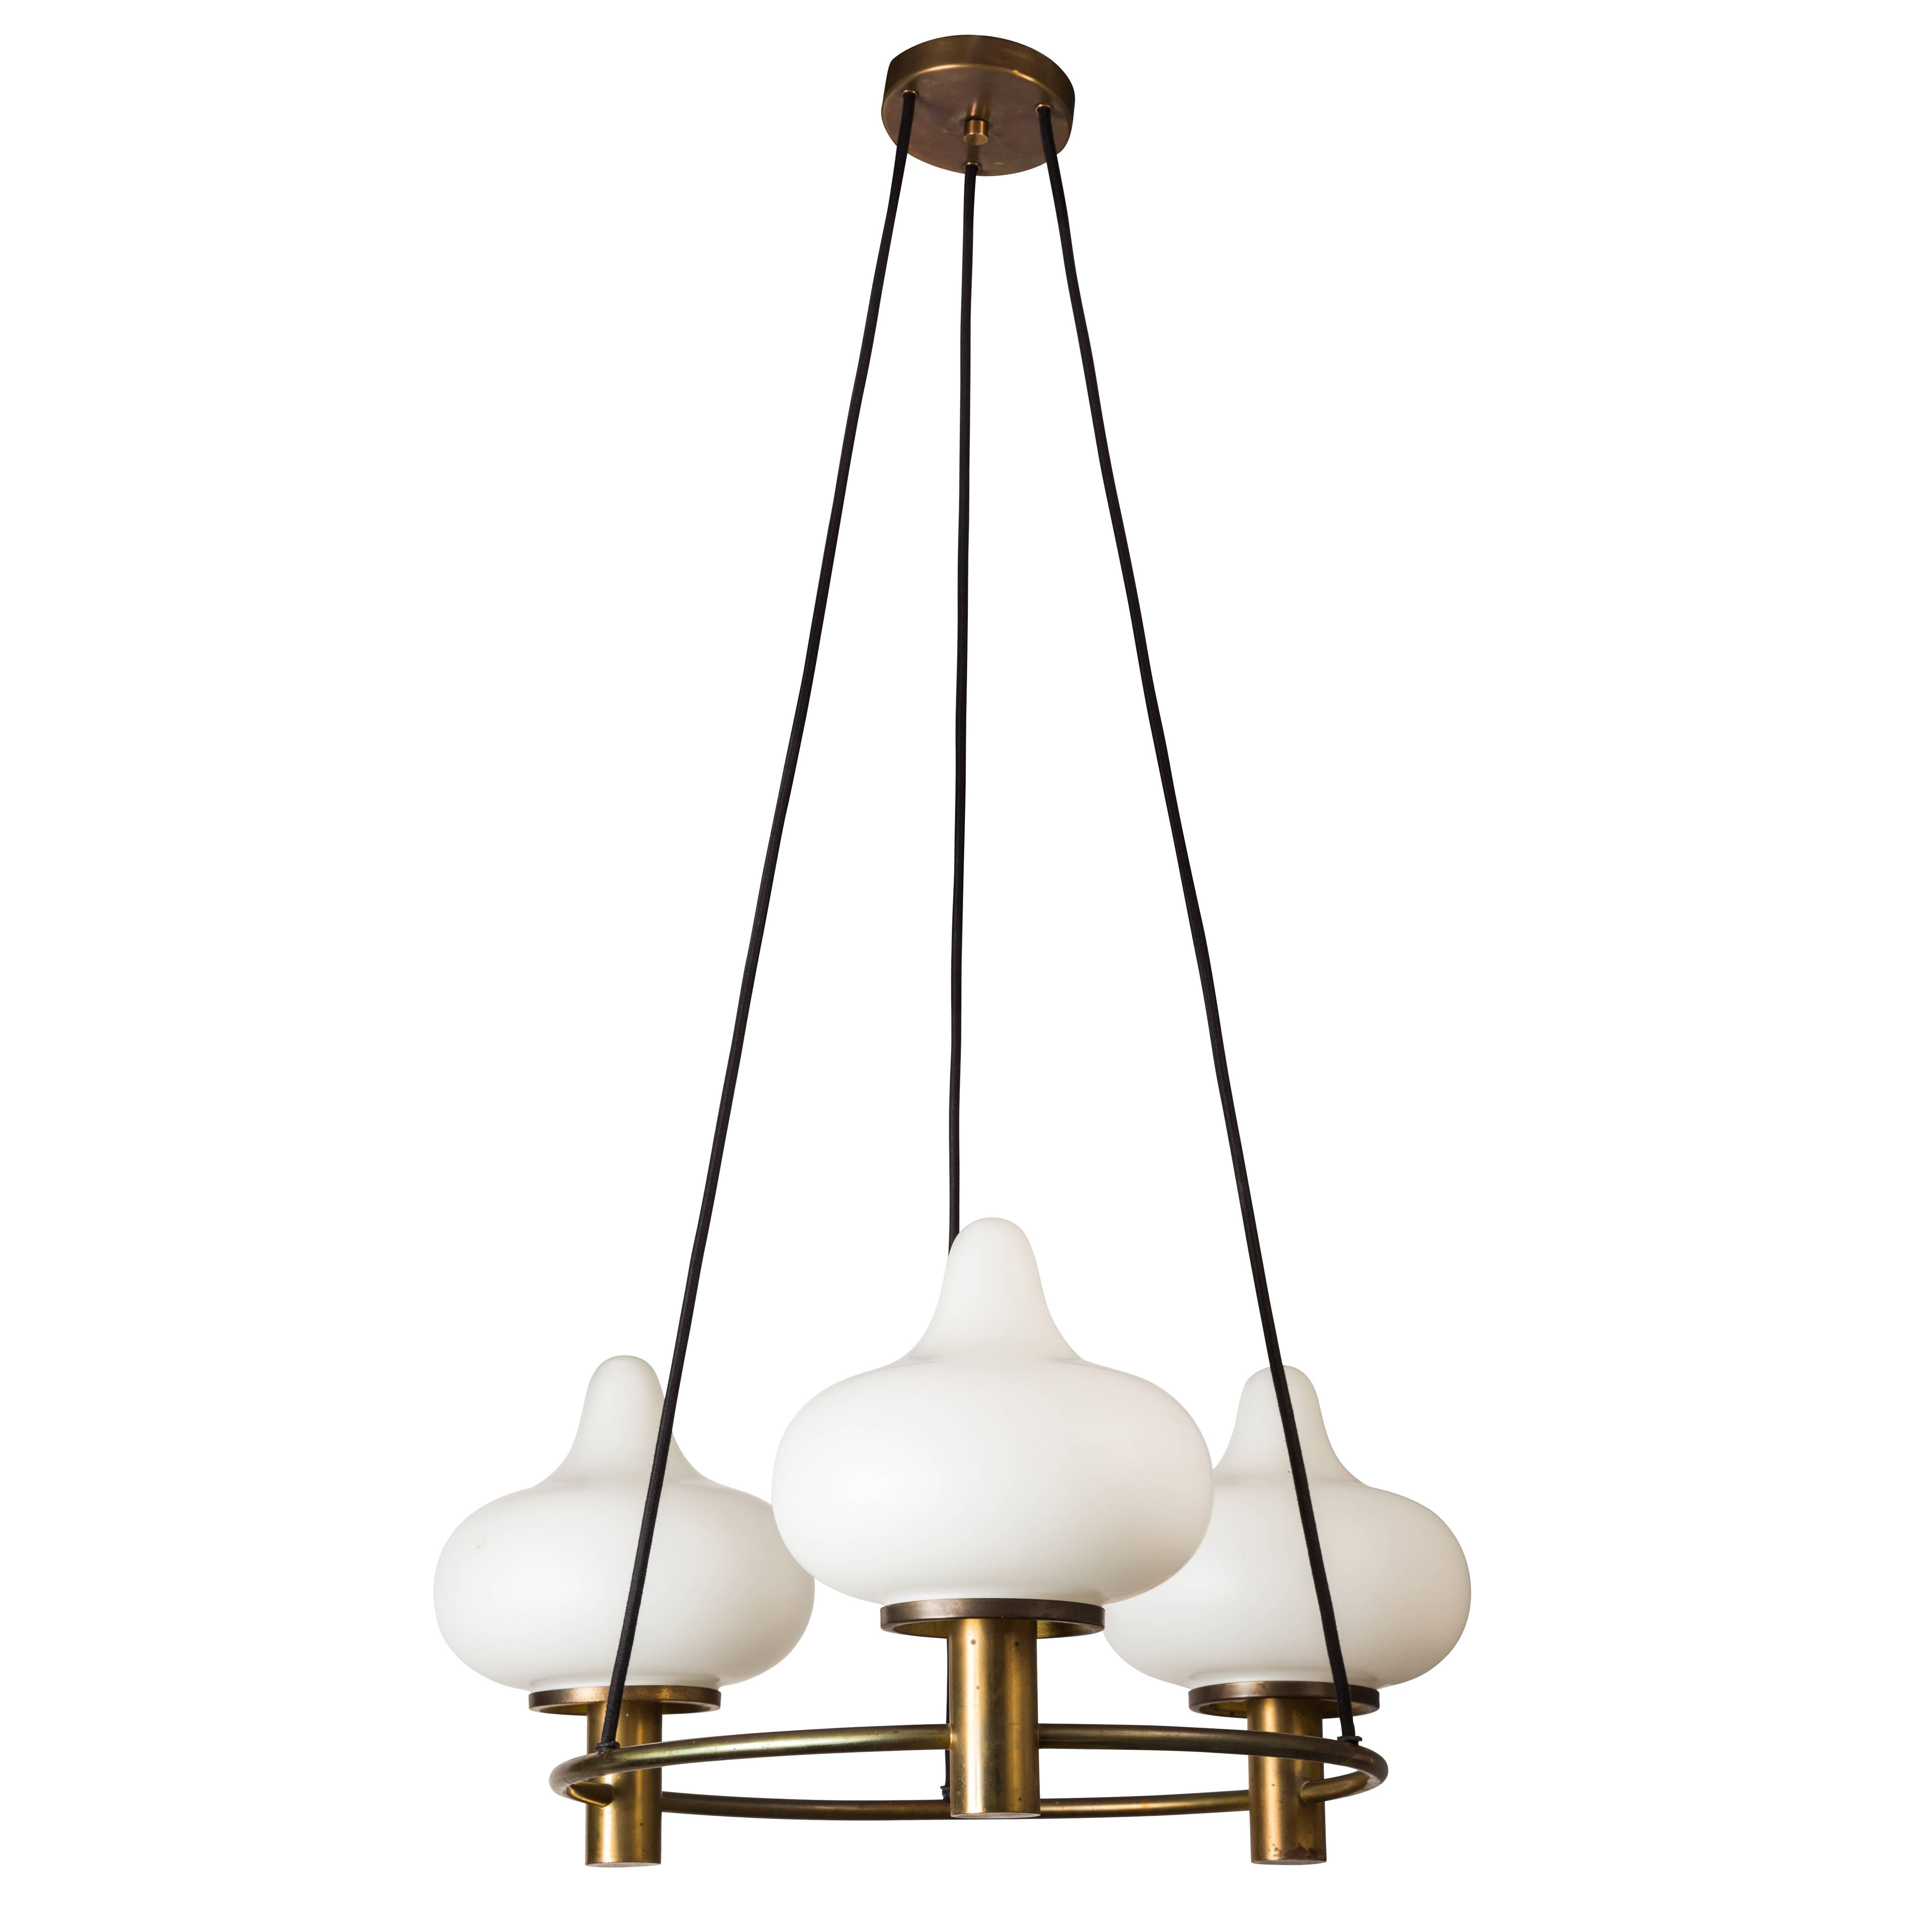 1950s Mogens Hammer & Henning Moldenhawer Chandelier for Louis Poulsen. Executed in patinated brass and matte opaline glass, Denmark. A very architectural and sculptural design that floats with lightness yet presents an attractive scale.